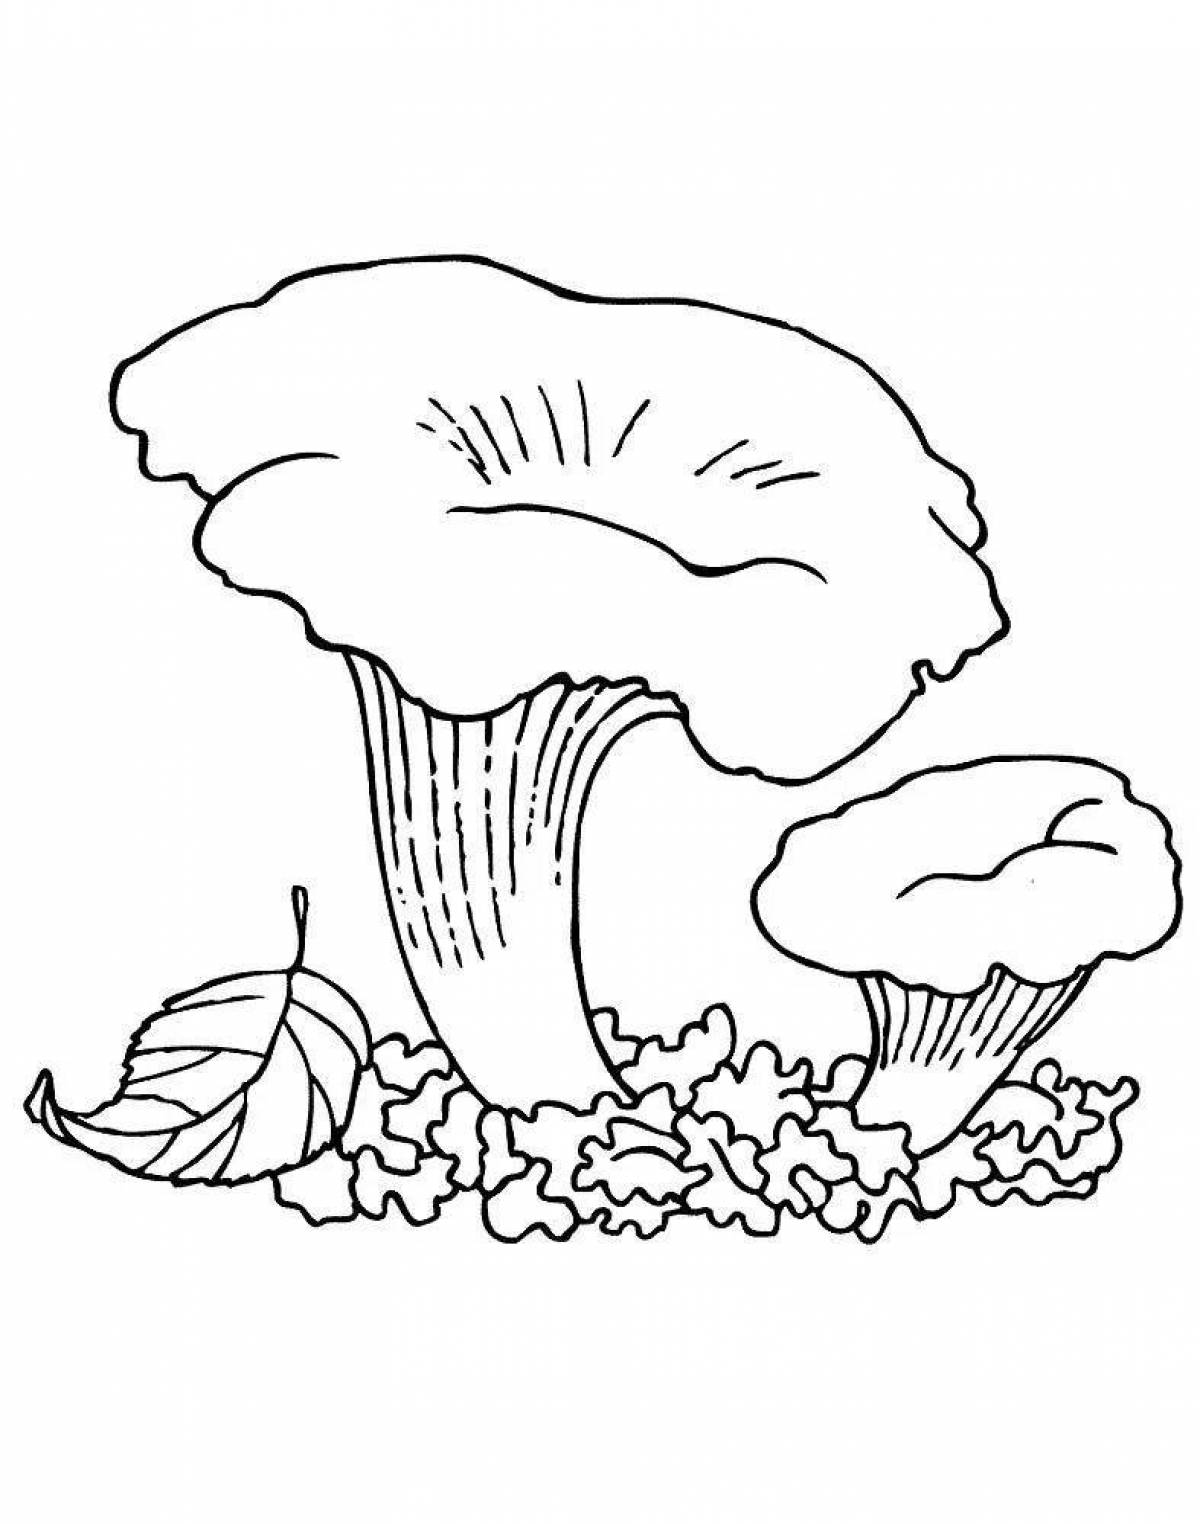 Cute mushroom coloring book for 3-4 year olds